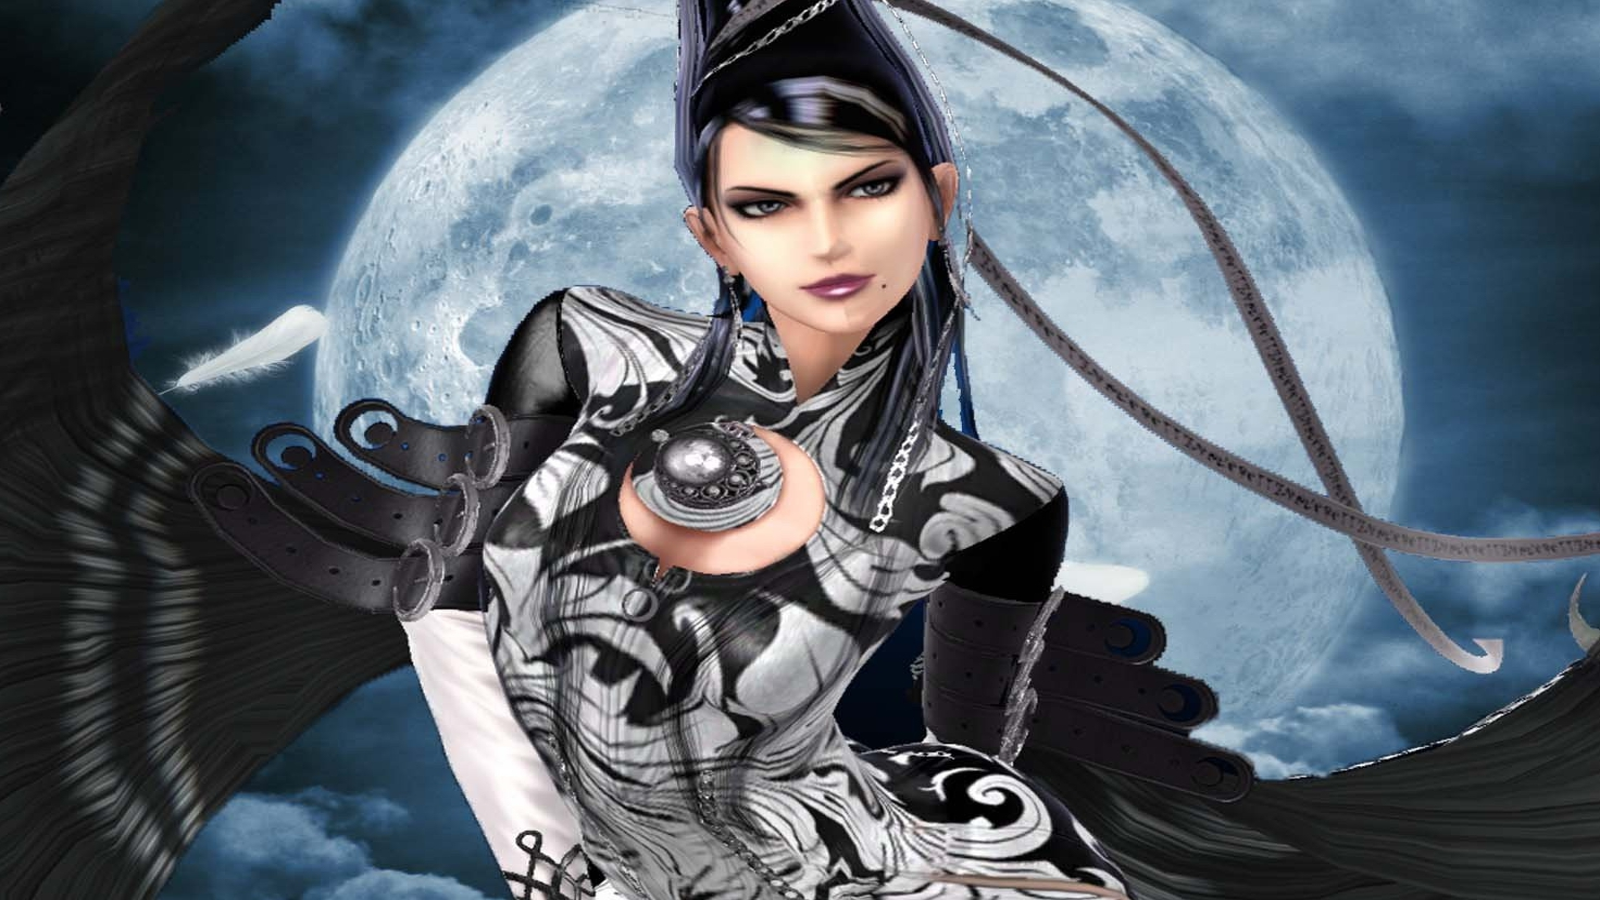 Is Bayonetta on Switch the definitive console version?